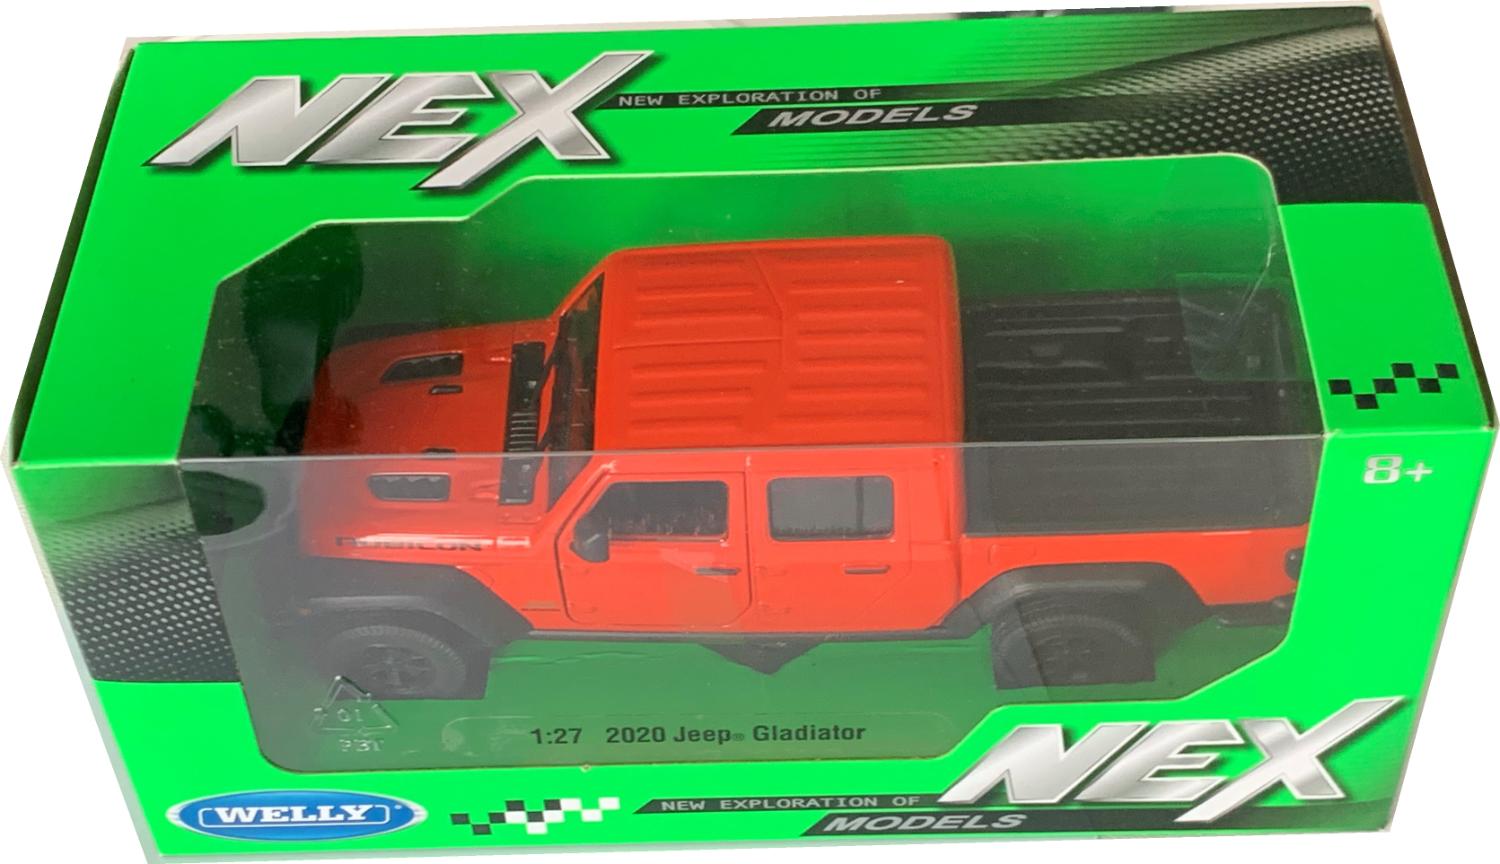 Jeep Gladiator 2020 in red / orange 1:27 scale model from Welly